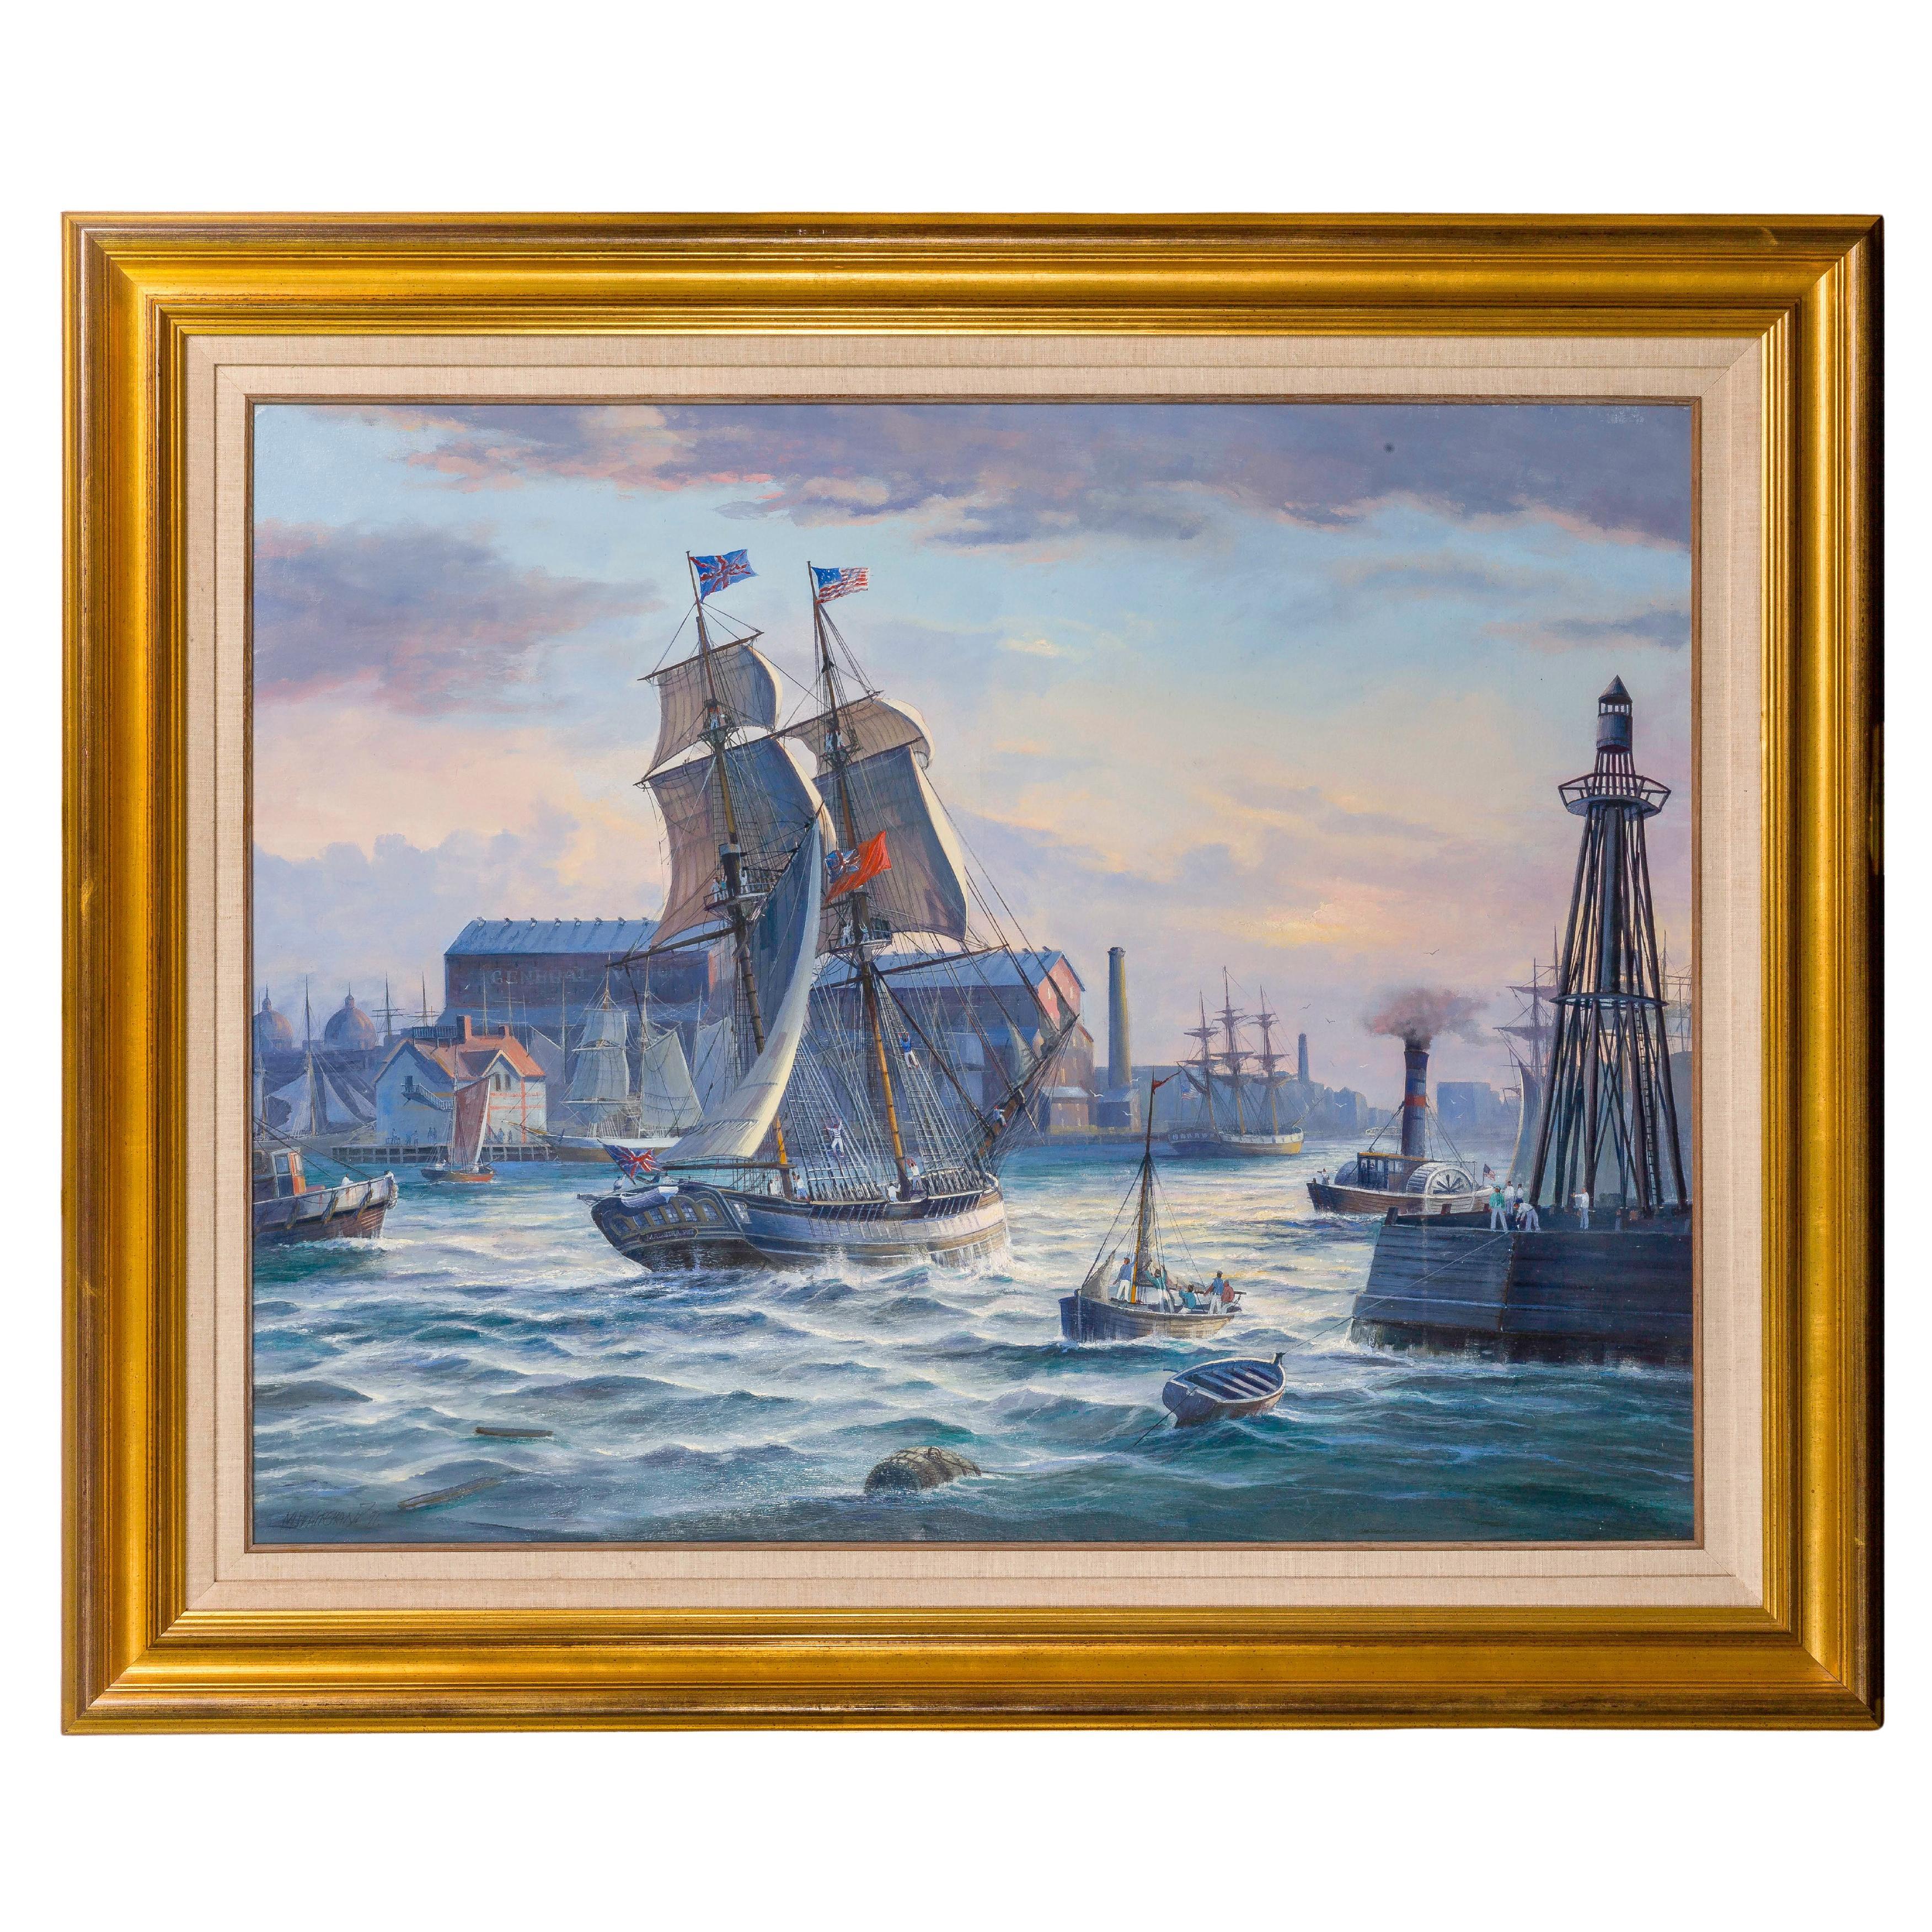 "Entering the Busy Port" by Michael Whitehand For Sale